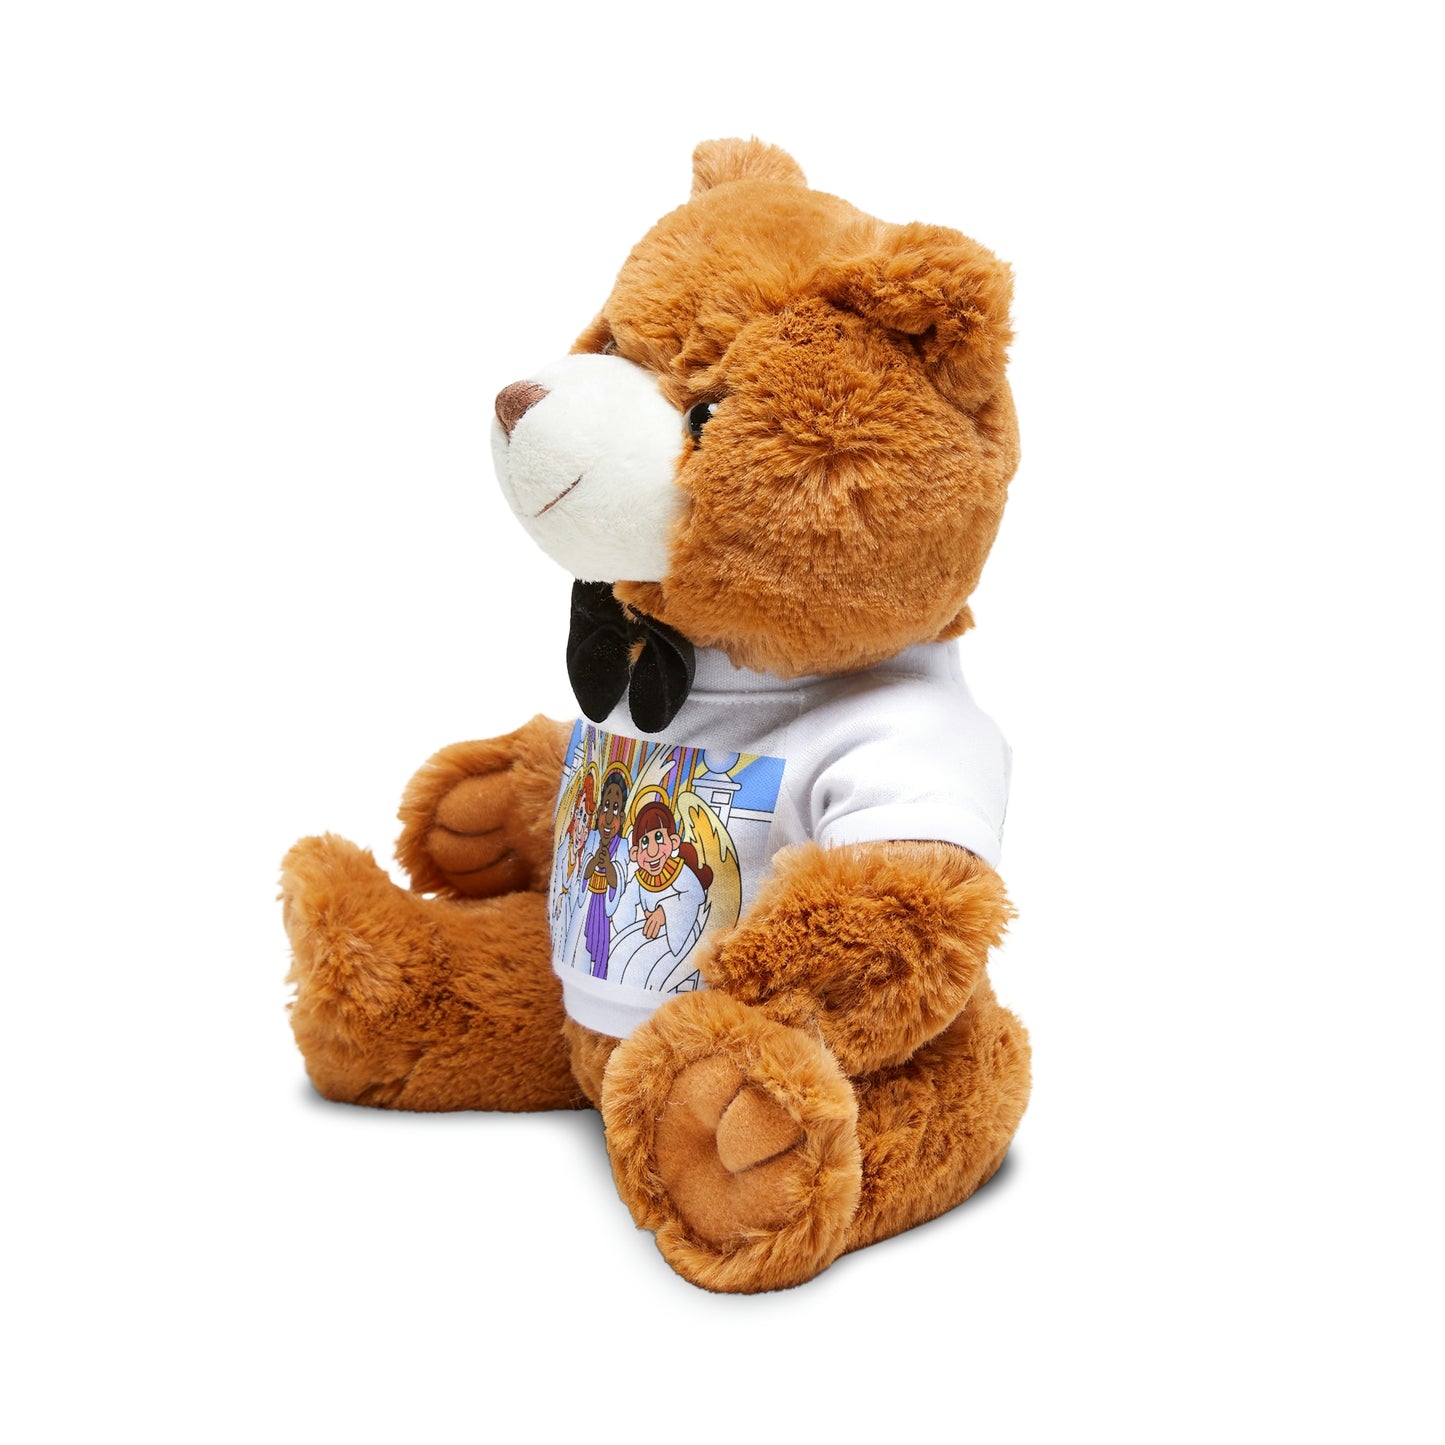 Shirley, Goodness and Mercy! Teddy Bear with T-Shirt